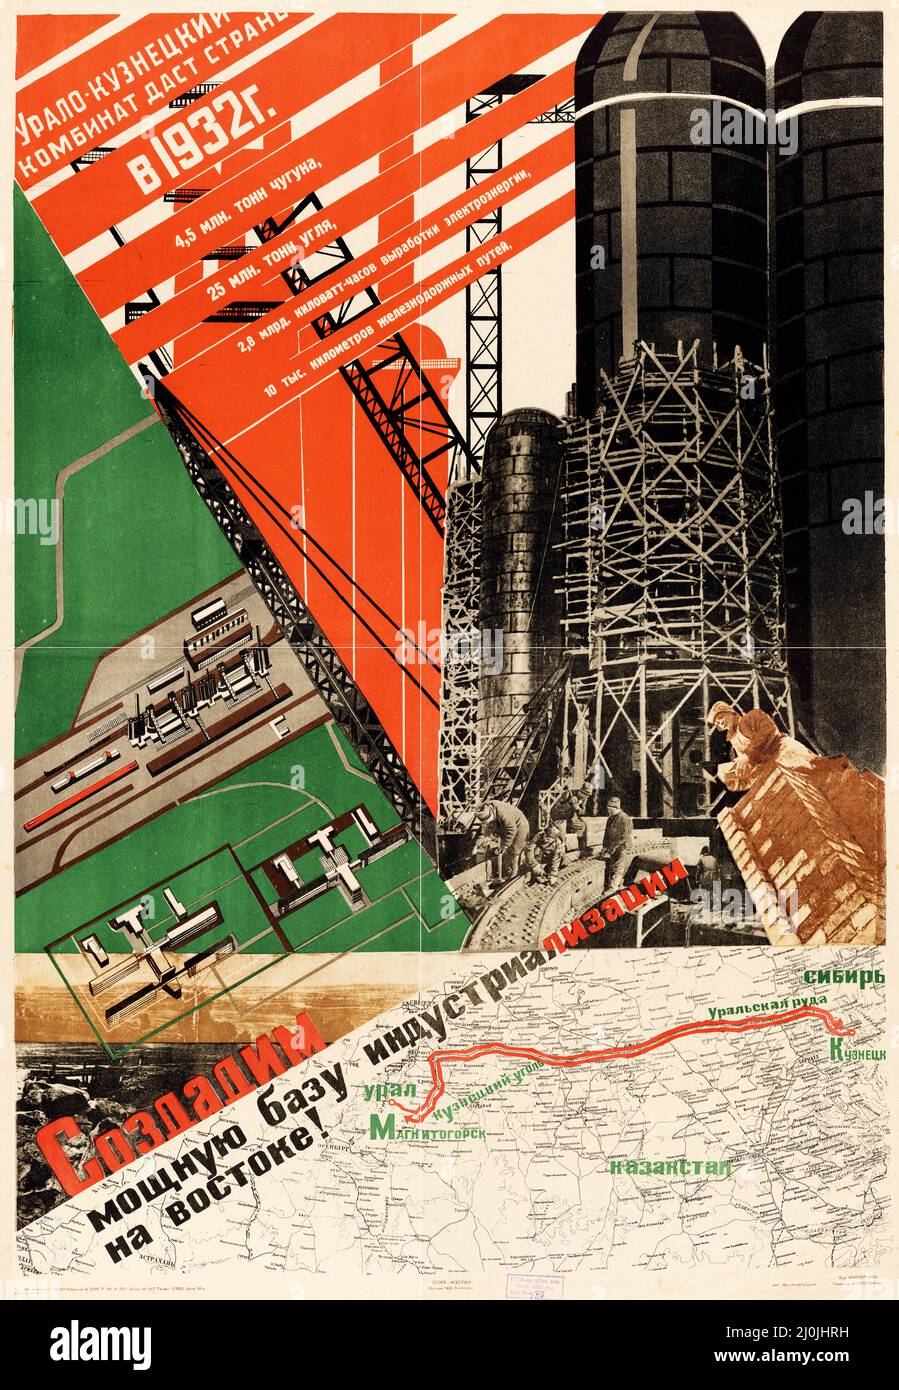 Vintage Russian poster - We Will Create a Powerful Base of Industrialisation in the East! Artwork by Dolgorukov, Nikolai Andreevi 1931. Stock Photo